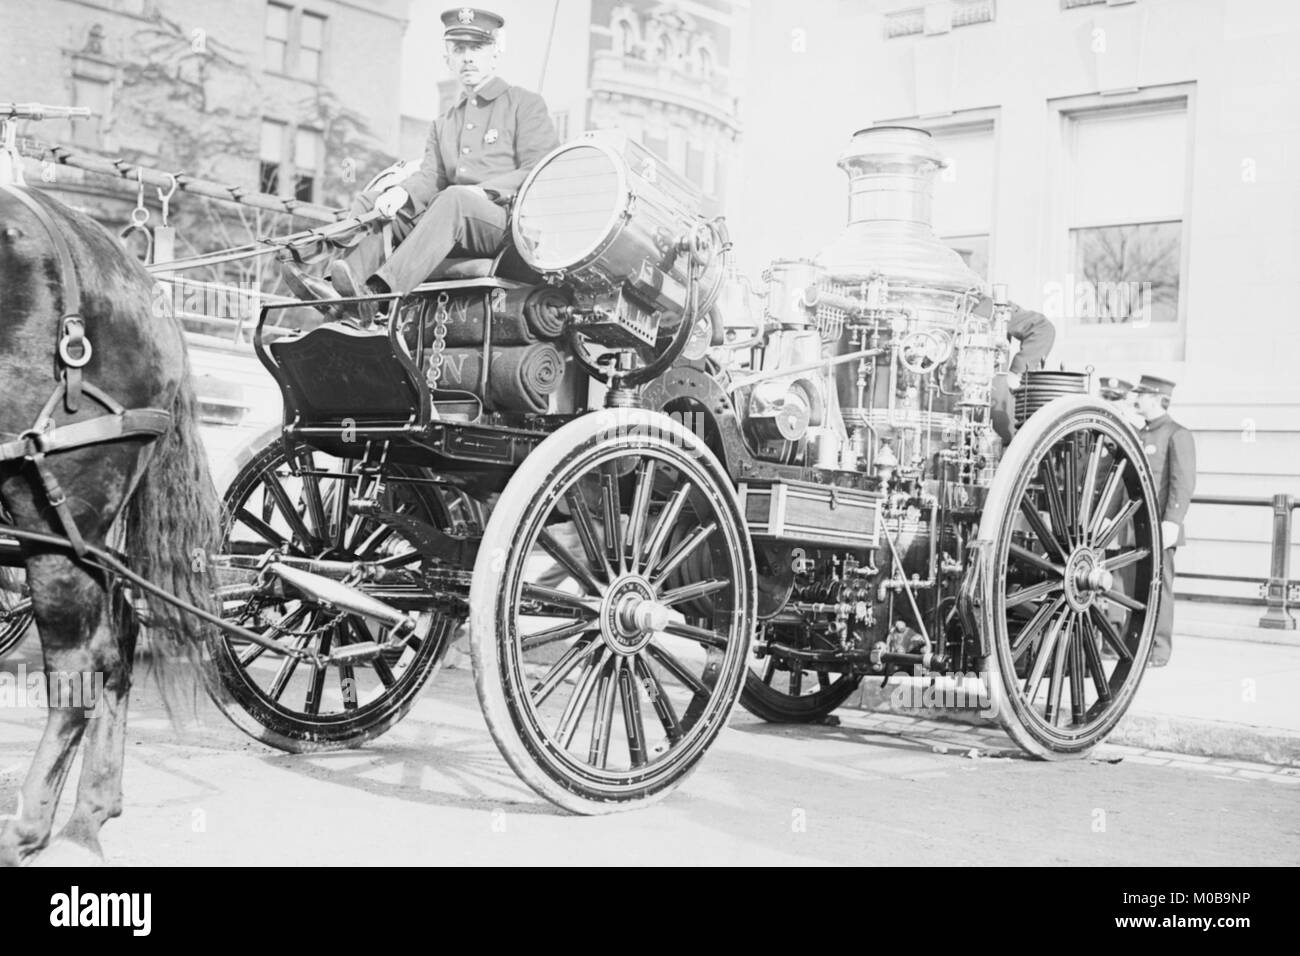 Searchlight on Horse Drawn Steam Boiler Fire Truck Stock Photo